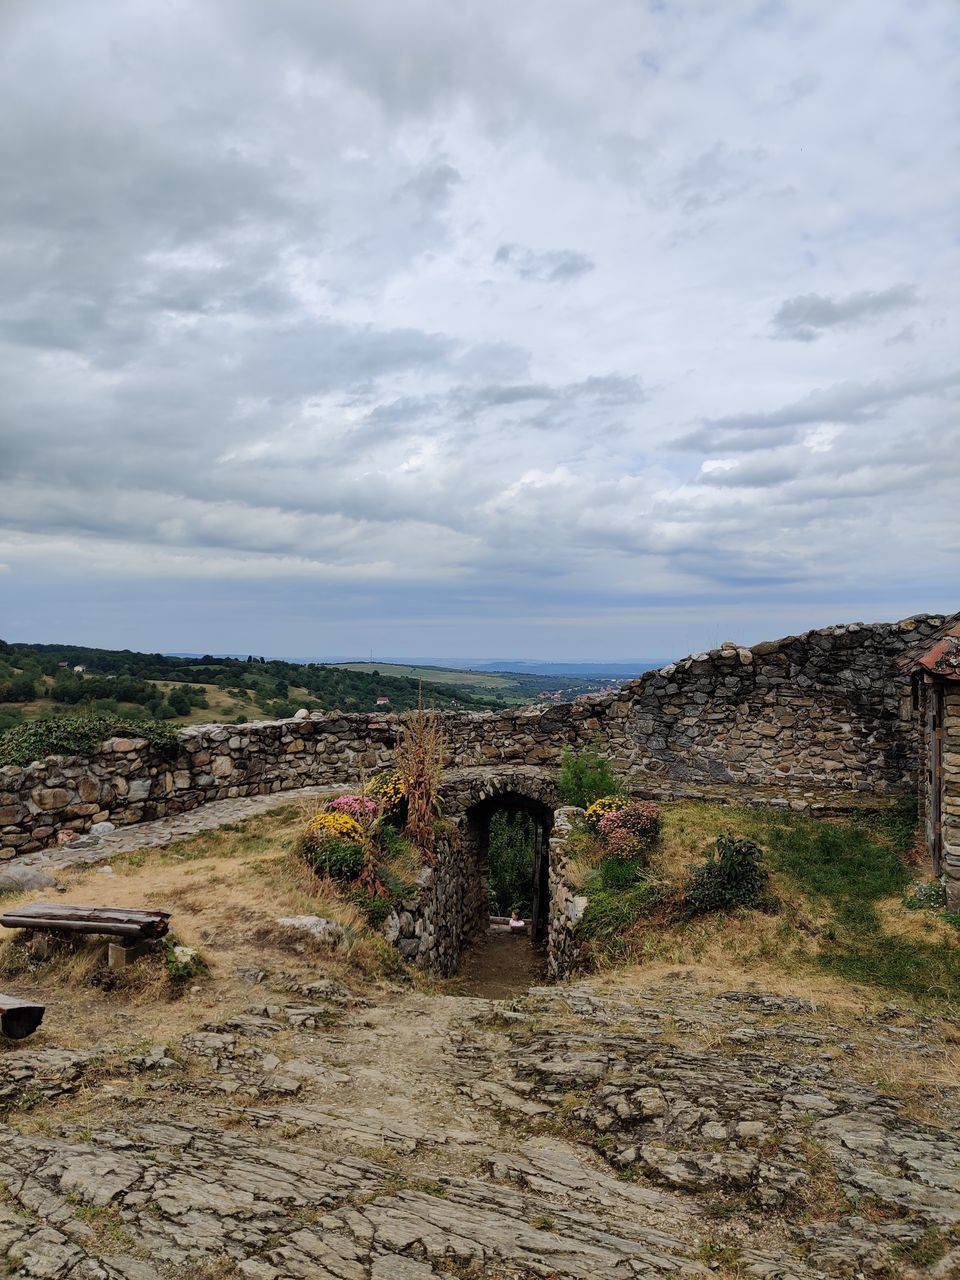 SCENIC VIEW OF OLD RUIN AGAINST SKY